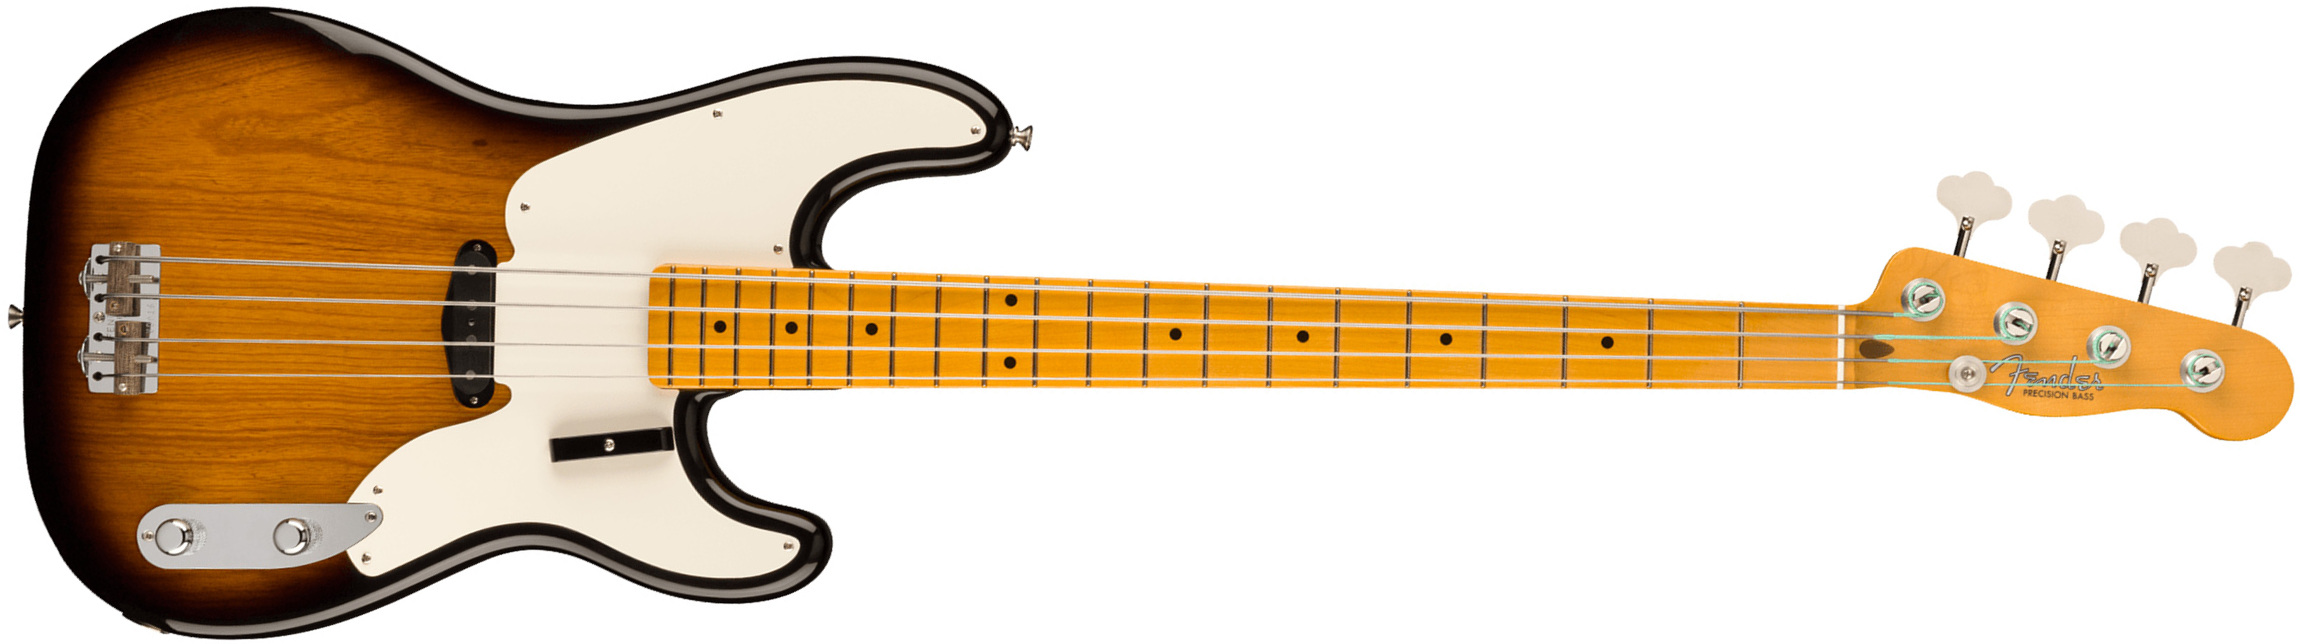 Fender Precision Bass 1954 American Vintage Ii Usa Mn - 2-color Sunburst - Solid body electric bass - Main picture